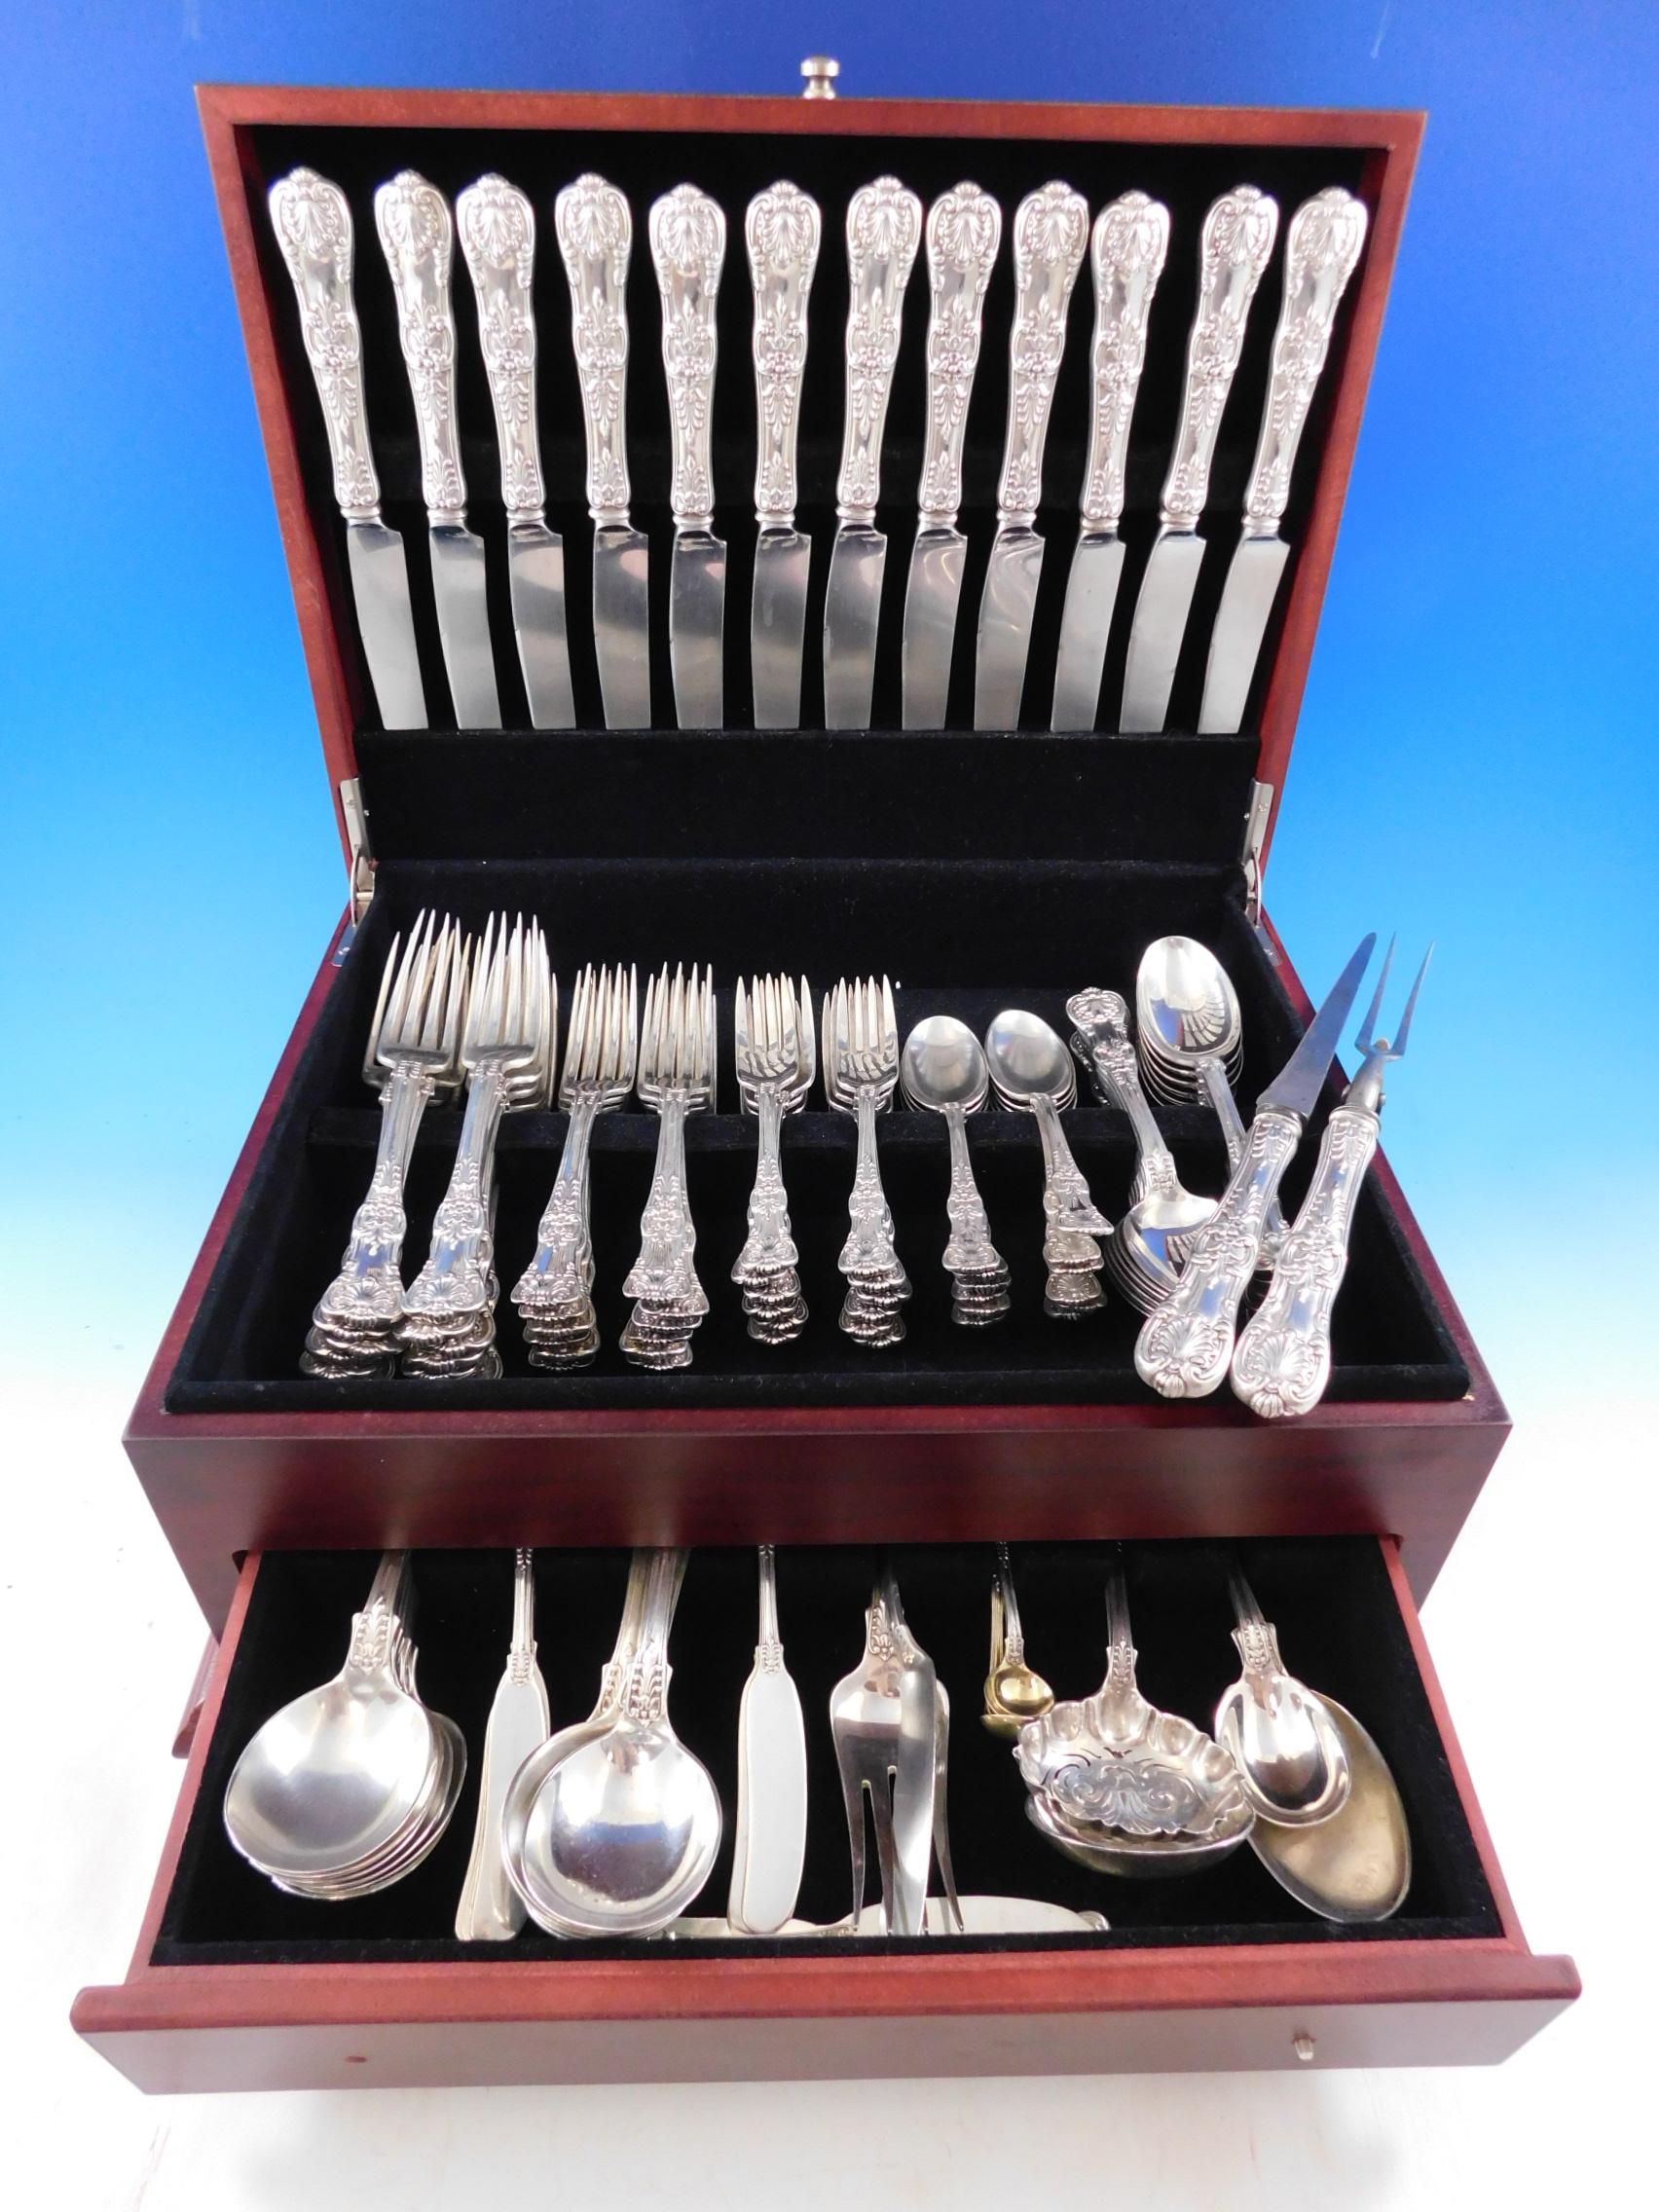 English King (c. 1885)
Patterns similar to our English King were first used in France and England late in the eighteenth century and have remained among the most popular styles for>flatware today, in both Europe and America. Tiffany & Co. first made